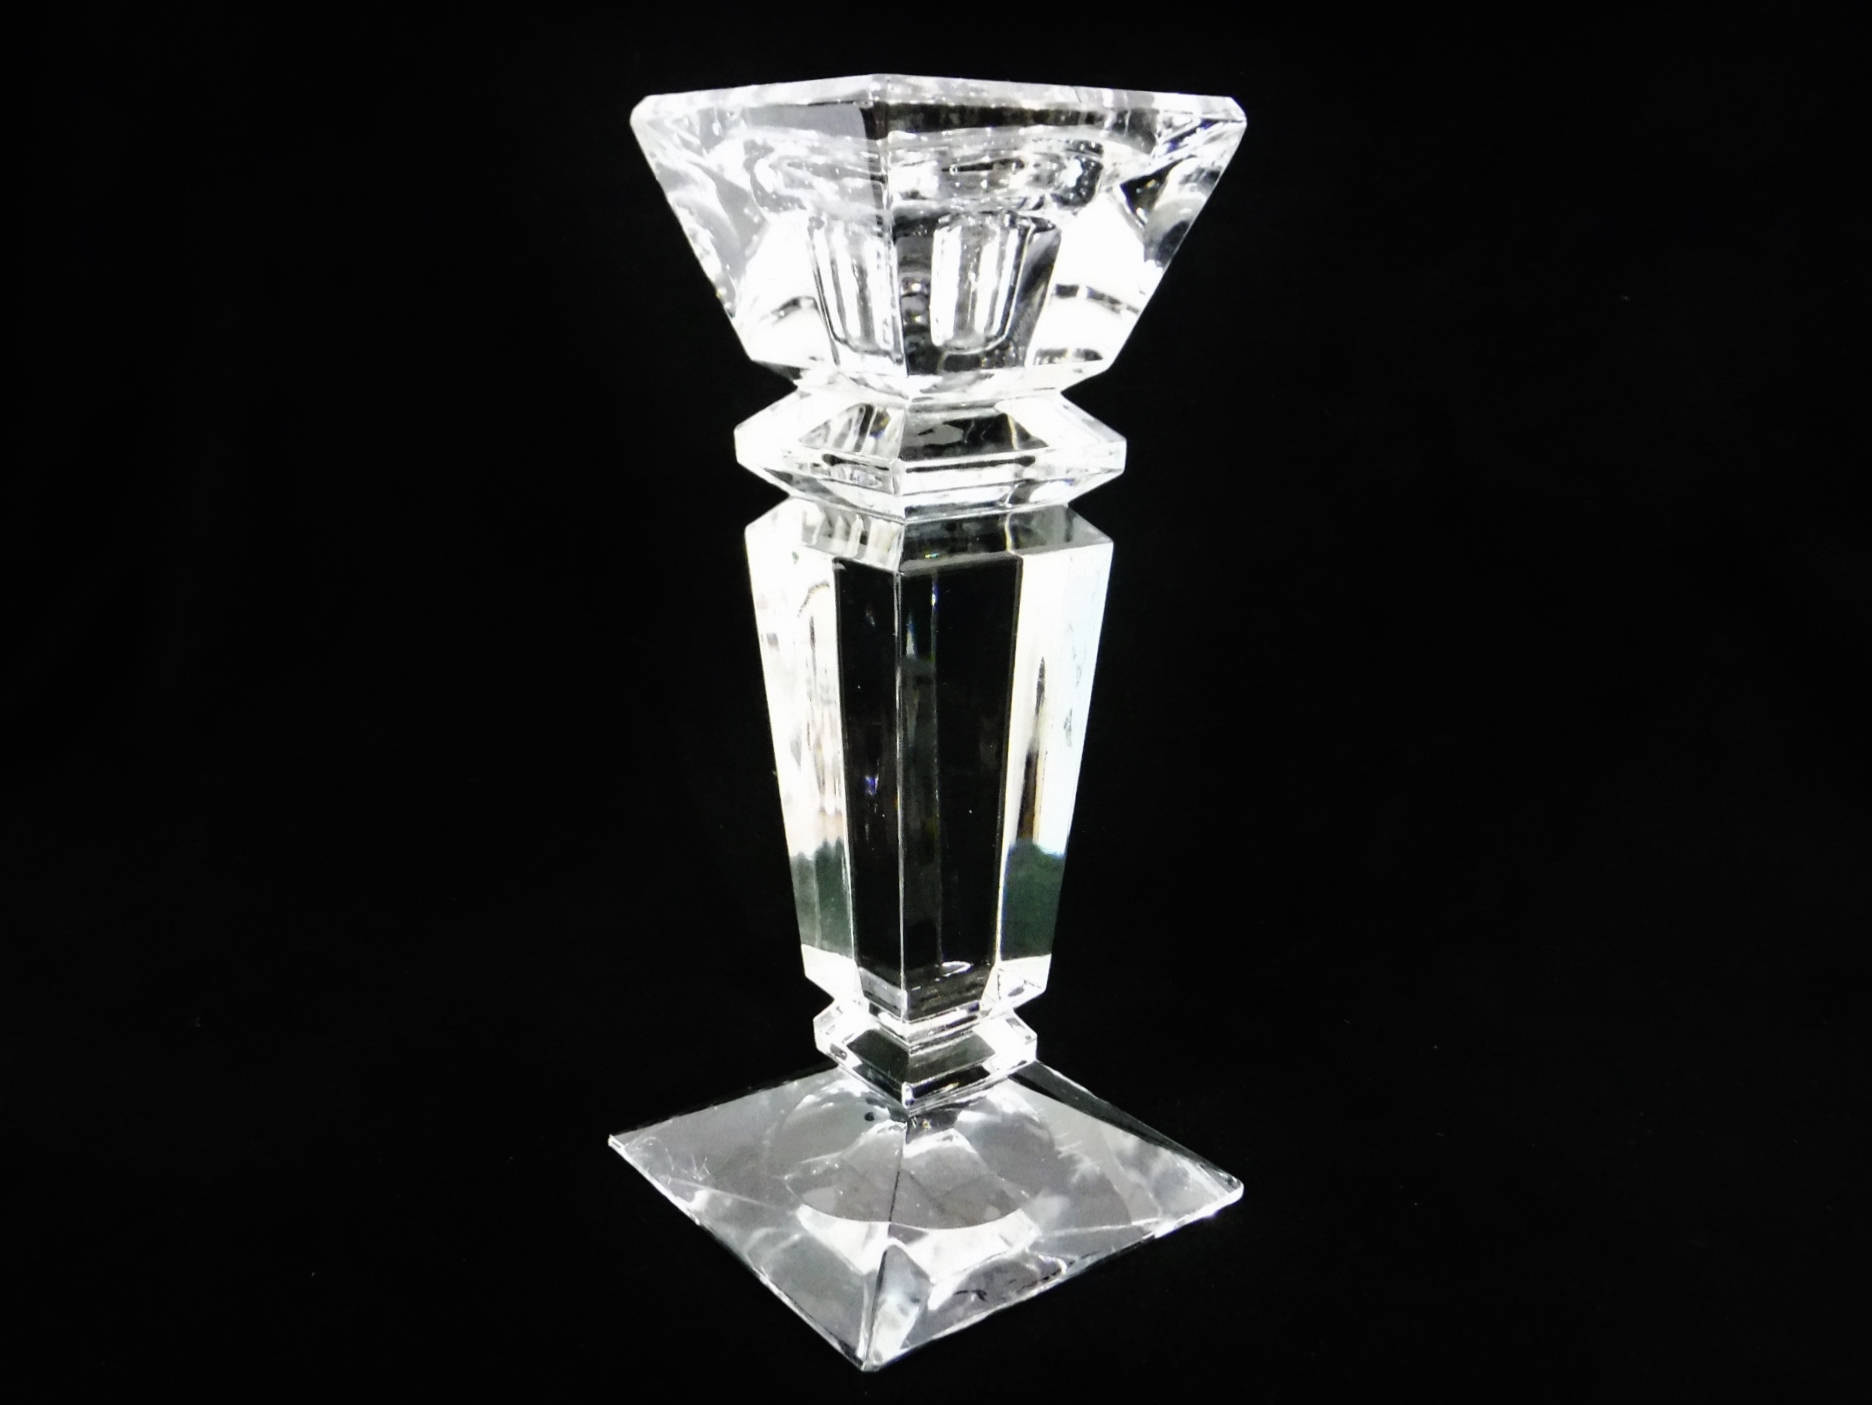 anna hutte bleikristall lead crystal vase of lead crystal candle holder square crystal candlestick glass etsy intended for dpowiaksz